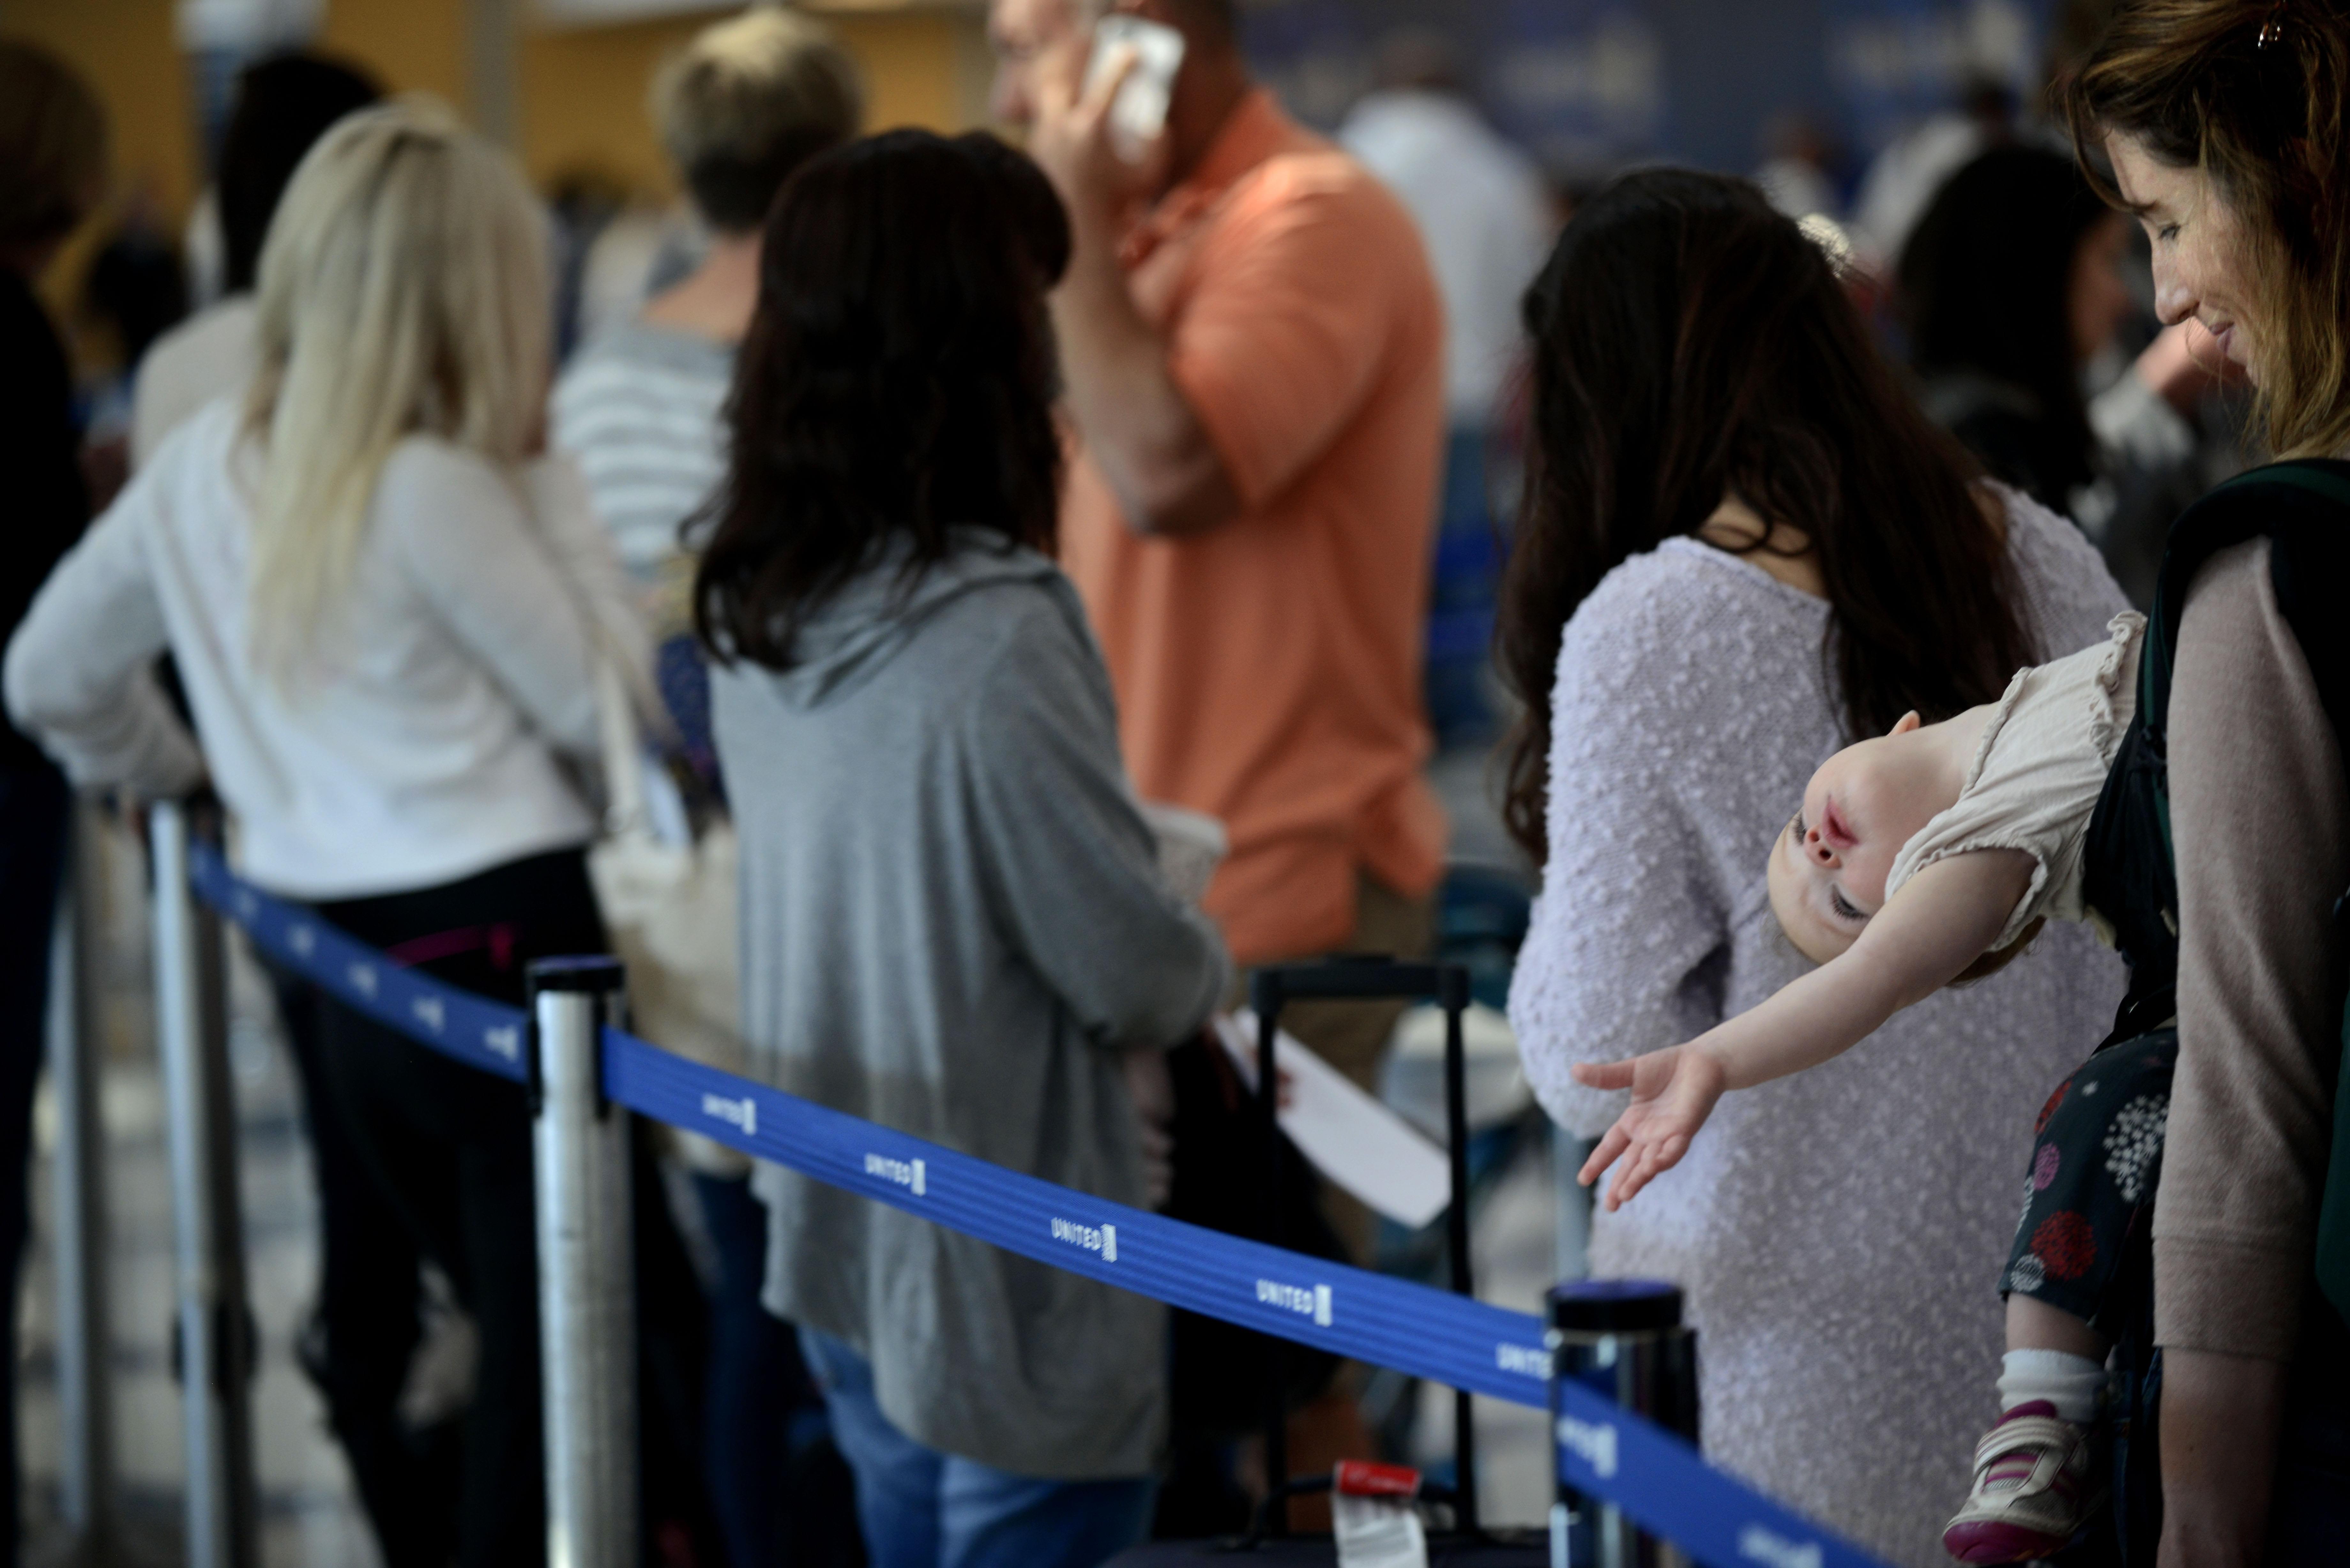 Travelers wait in line after several delays at O'Hare International Airport in Chicago.